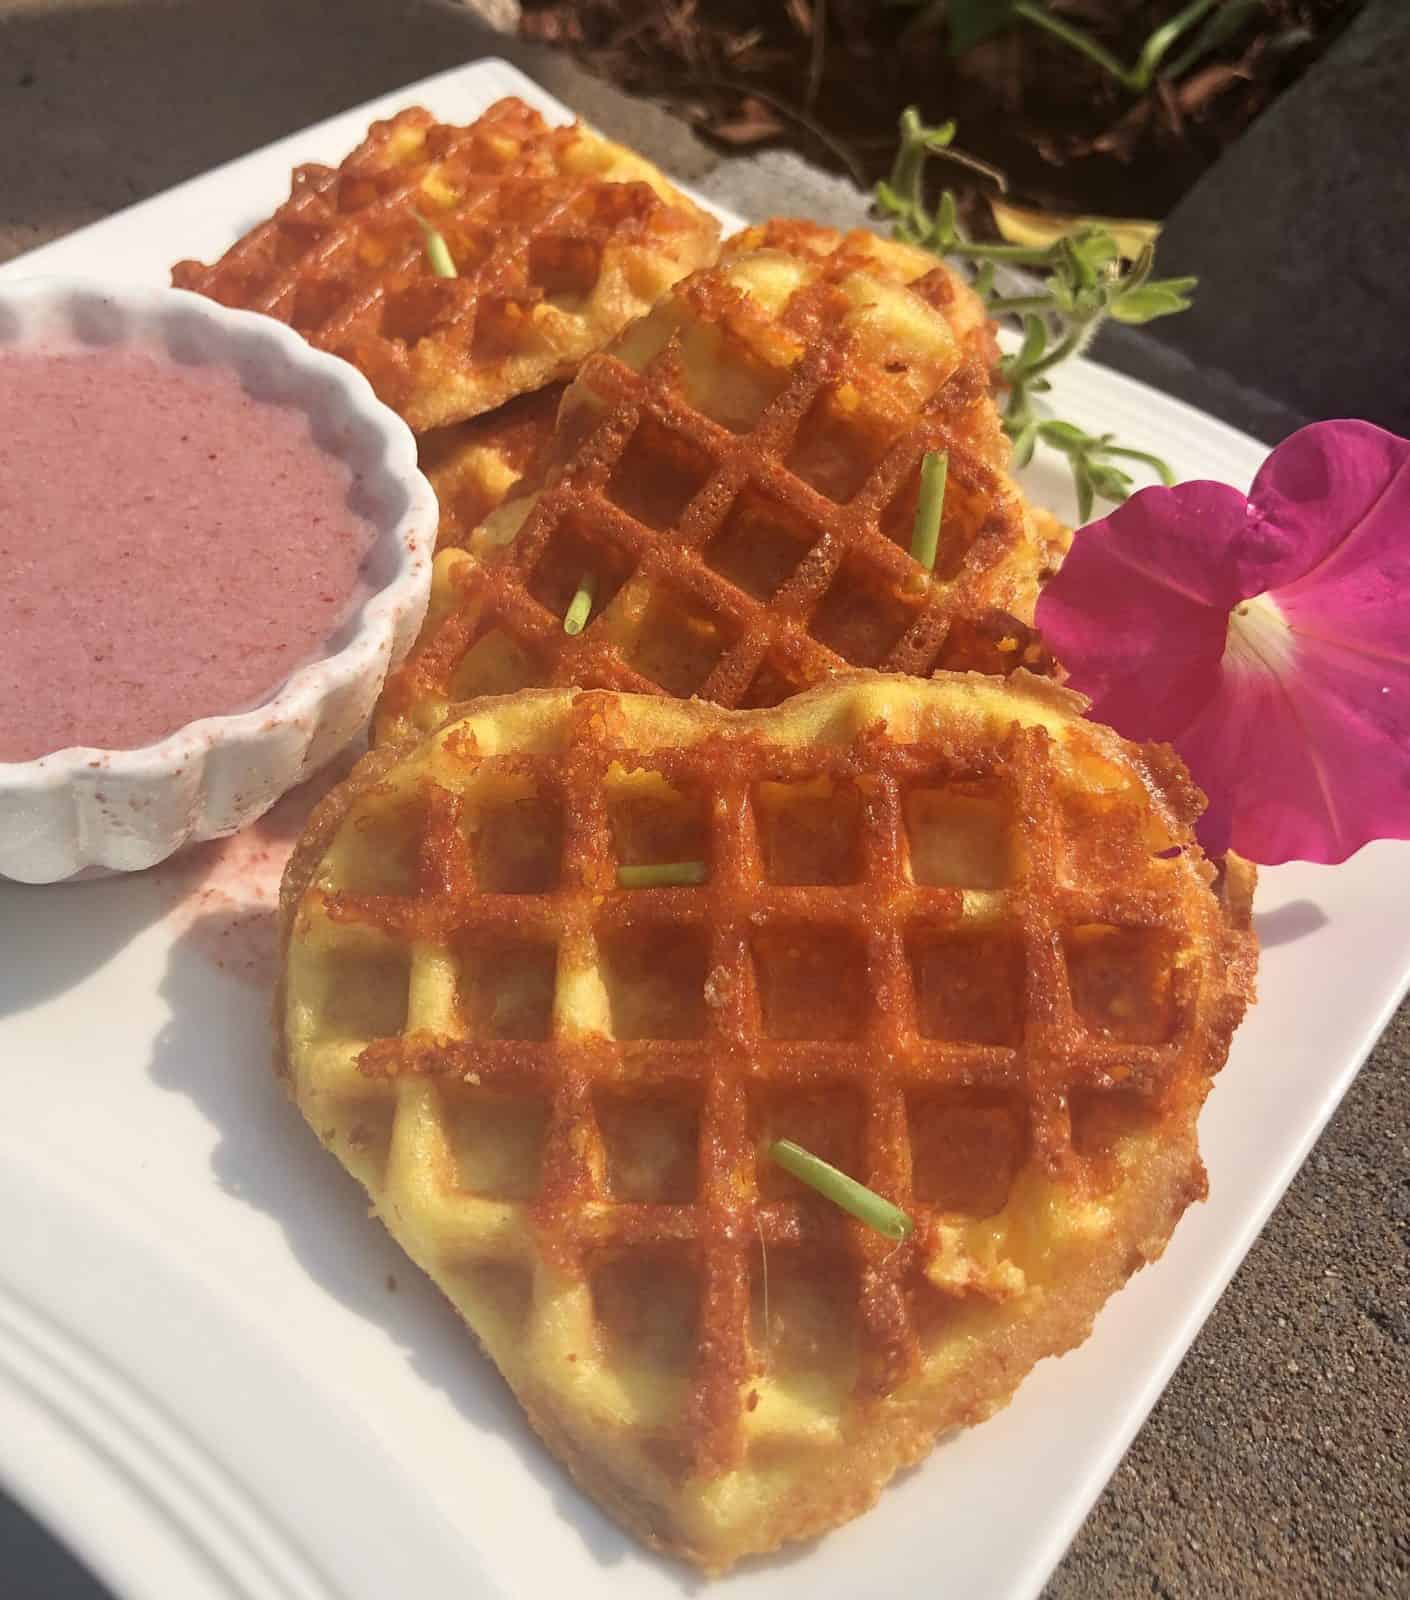 Heart shaped keto chaffles on a white plate with a side of strawberry dipping sauce